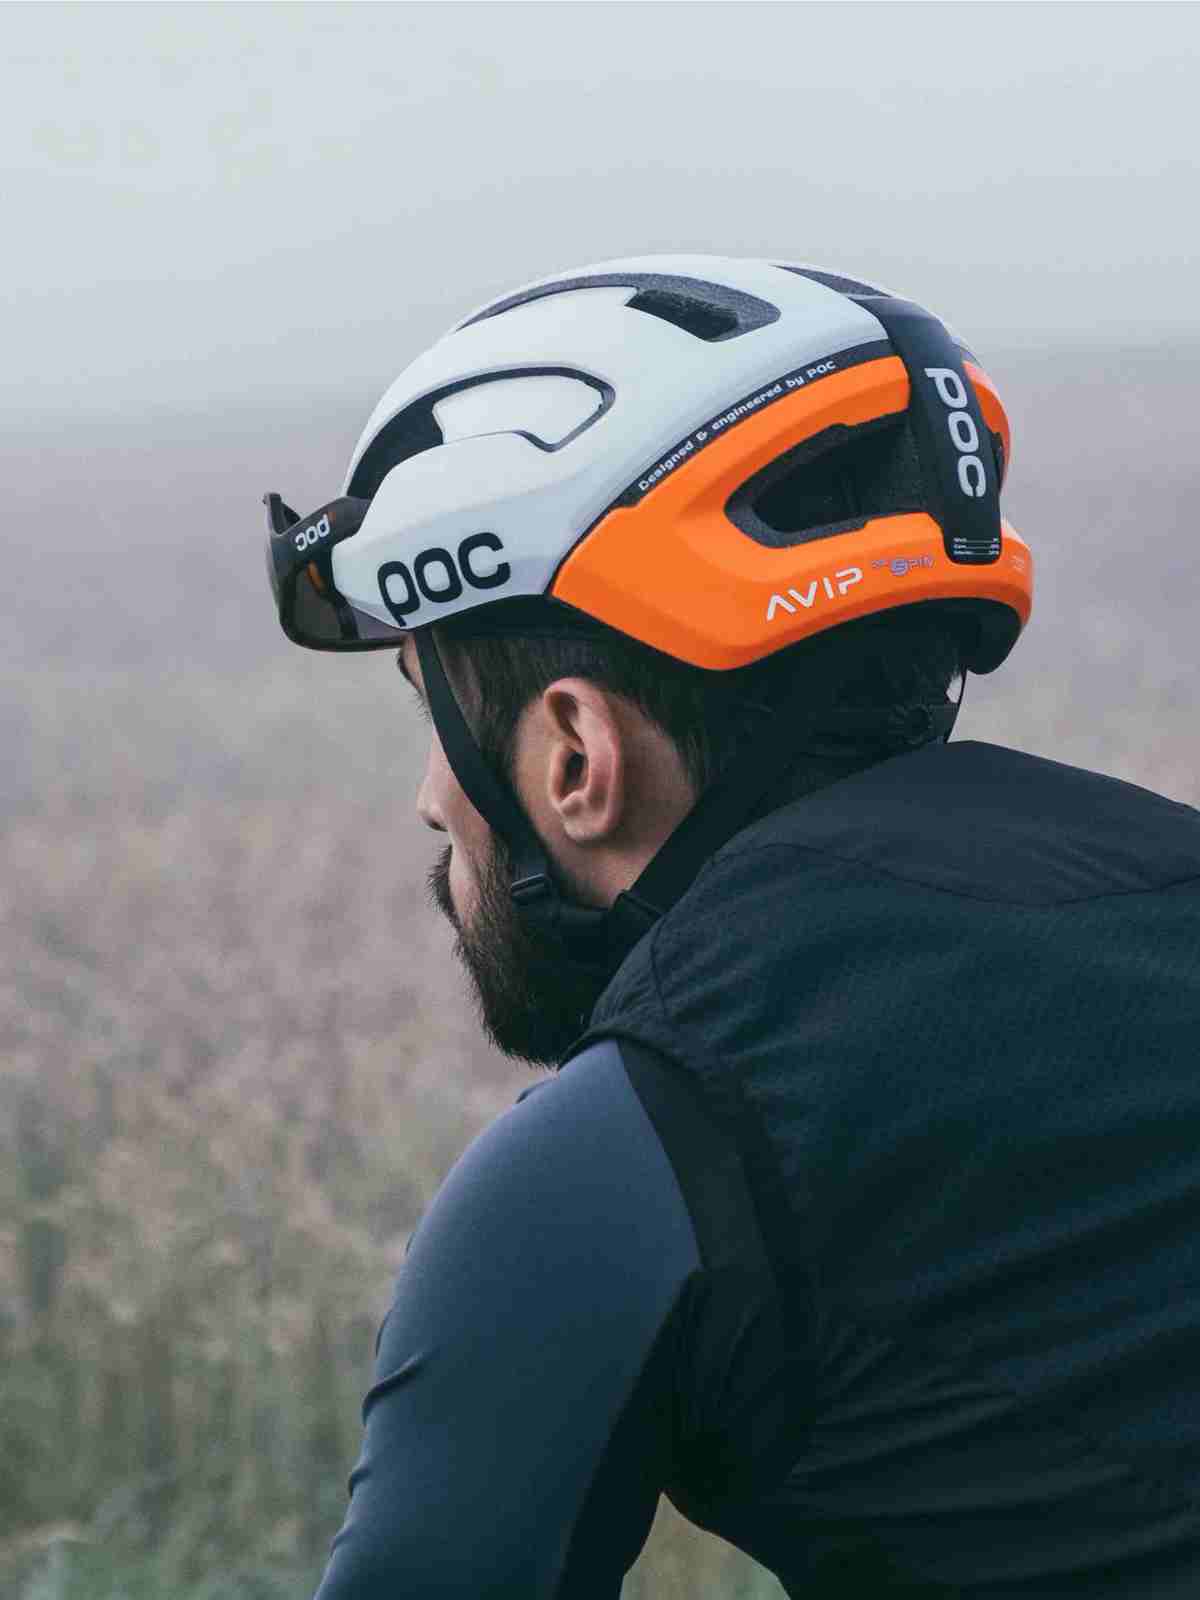 Kask Rowerowy POC OMNE AIR SPIN